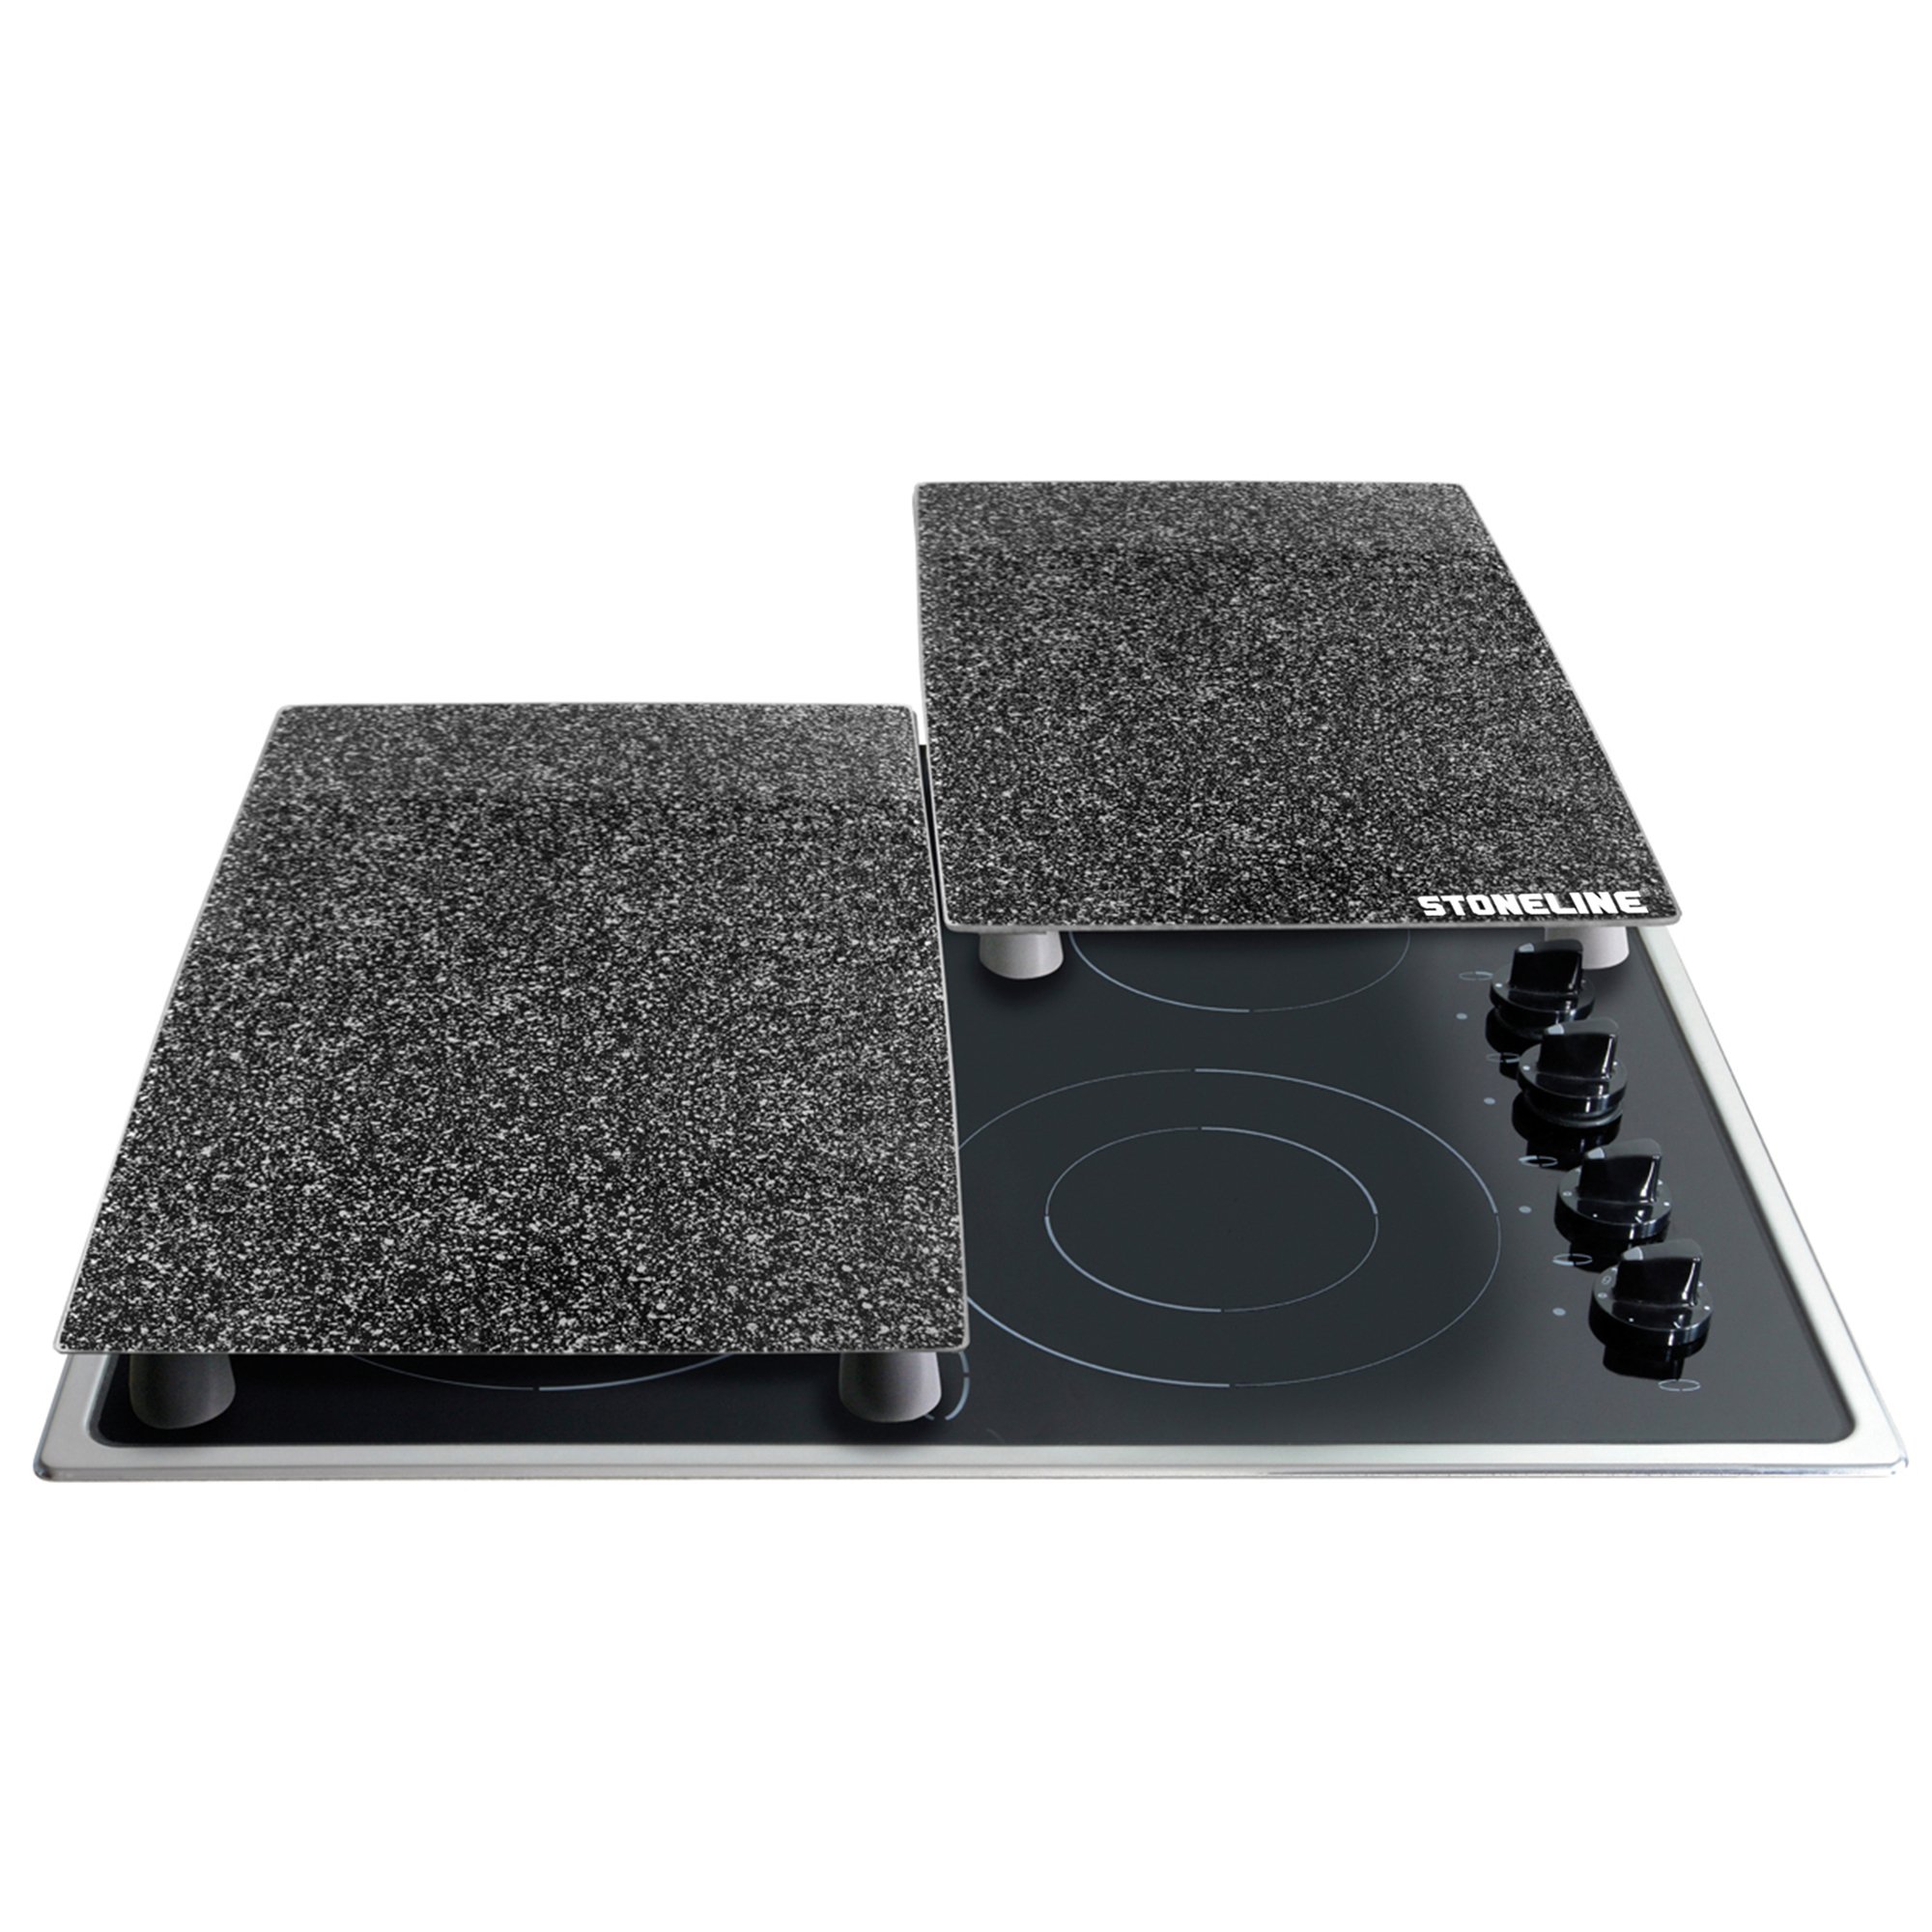 STONELINE® 2 pc Cooktop Cover Plates & Glass Cutting Board Set 52x30 cm | Accessories